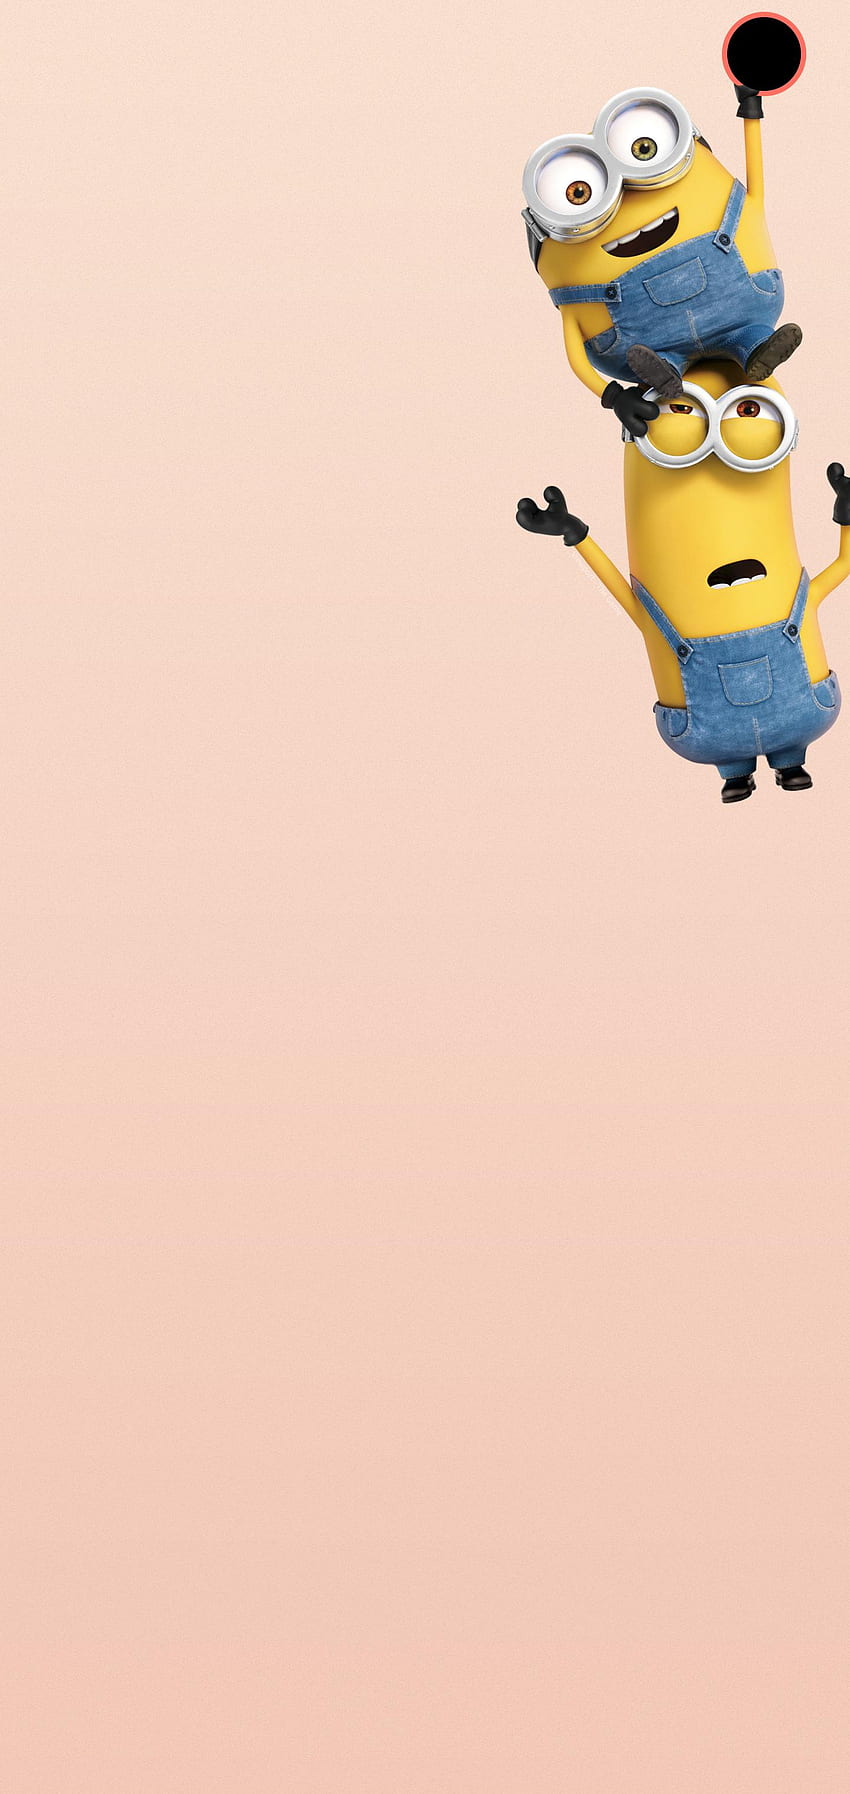 Minions of Despicable Me Hanging On by BlackBindy Galaxy S10 Hole HD phone wallpaper